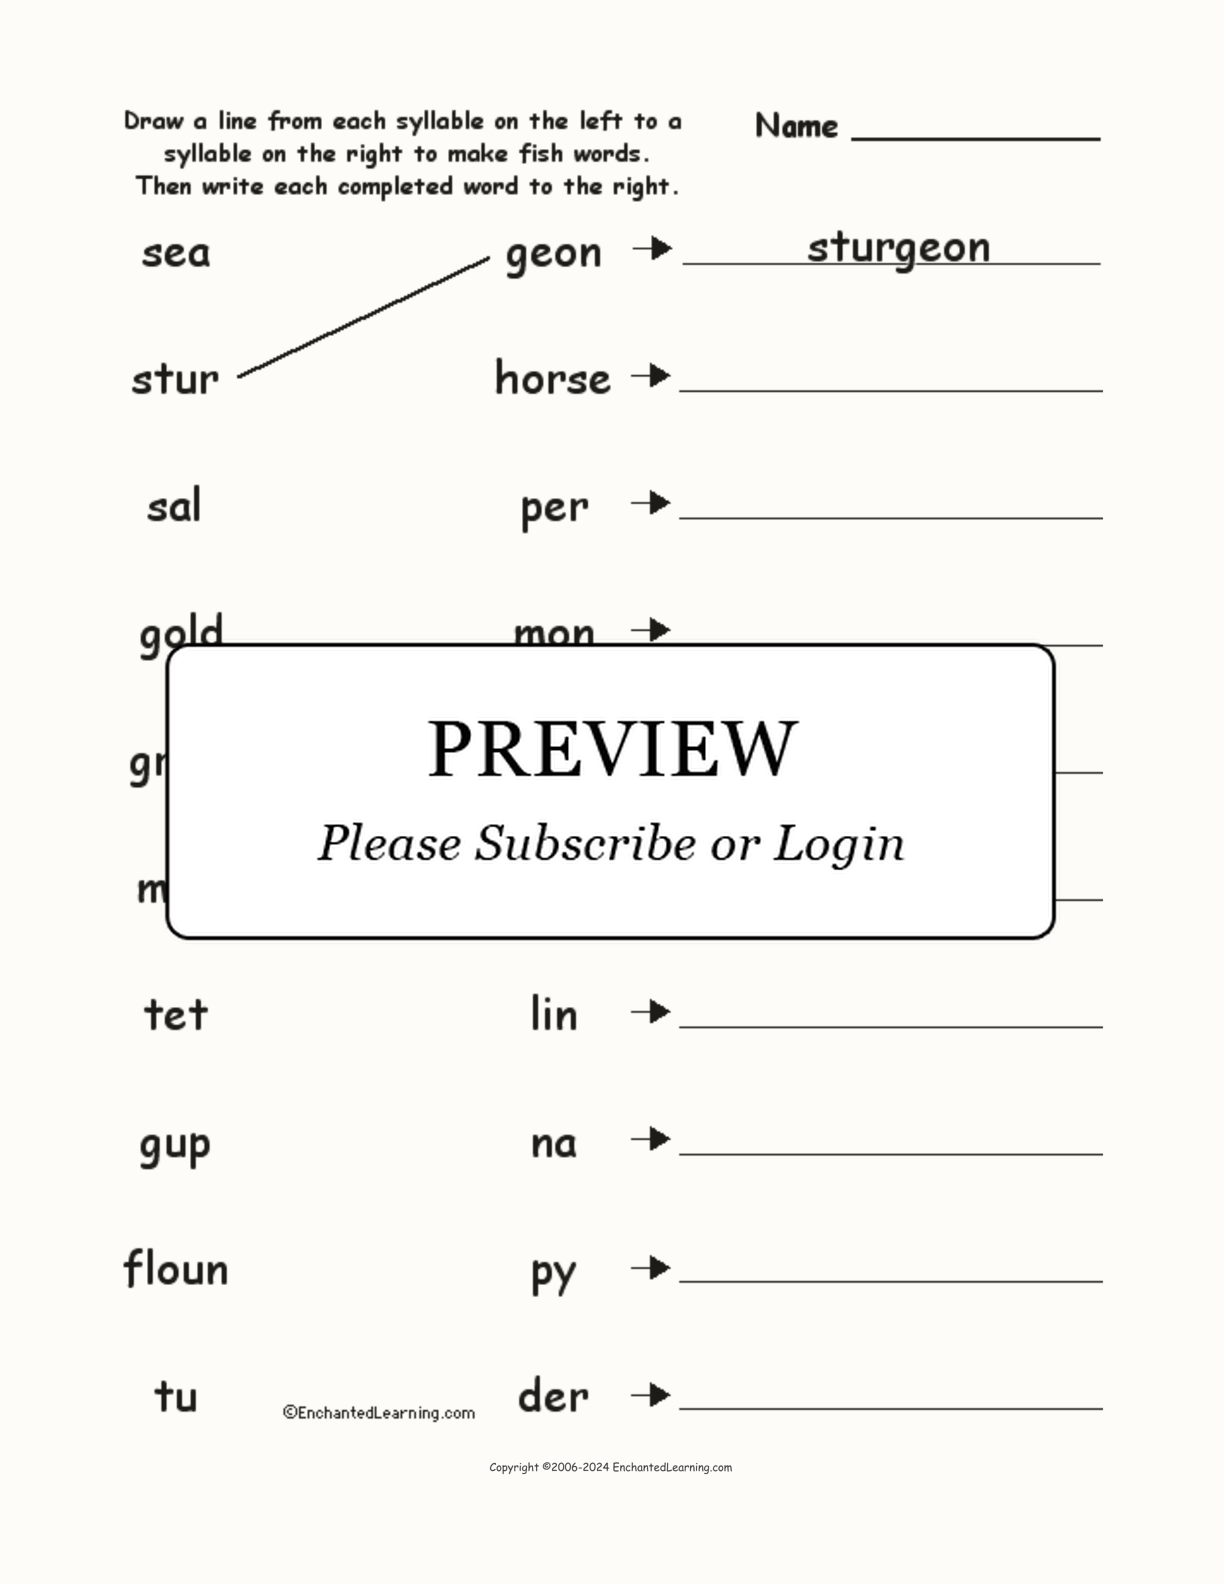 Match the Syllables: Fish Words interactive worksheet page 1